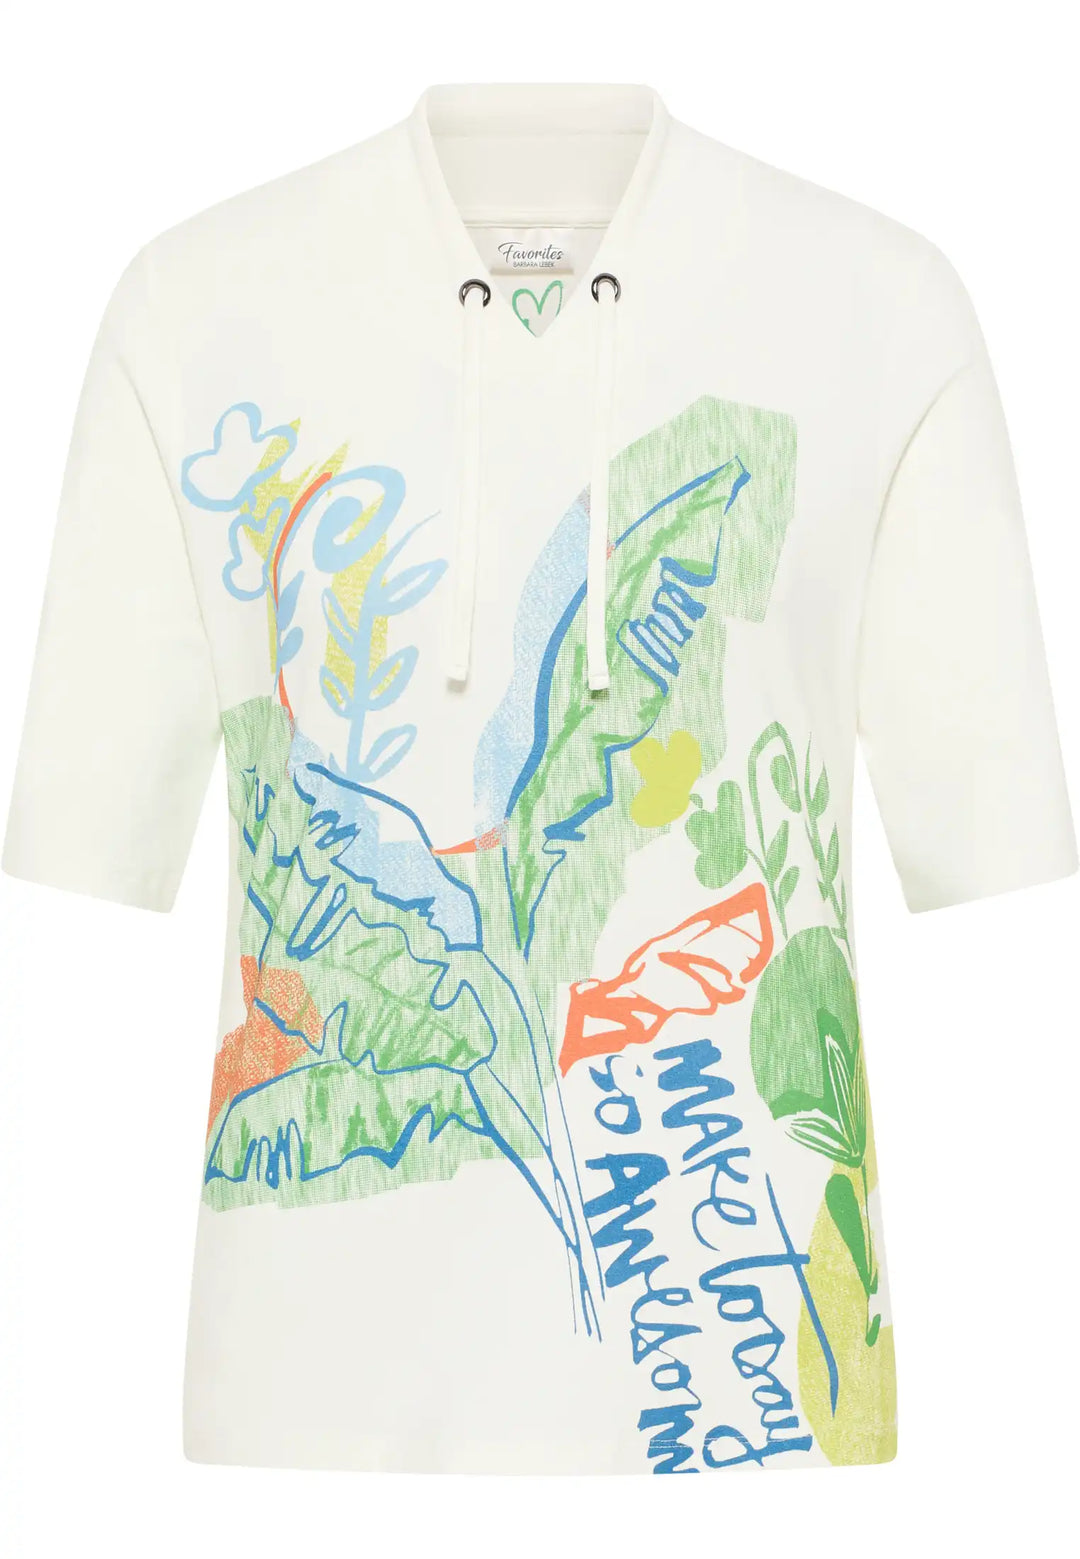 Light cream hooded sweatshirt with a botanical print and the phrase "Make Today So Awesome" on the front, V-neck with drawstrings, and short sleeves, style  57710042-120 